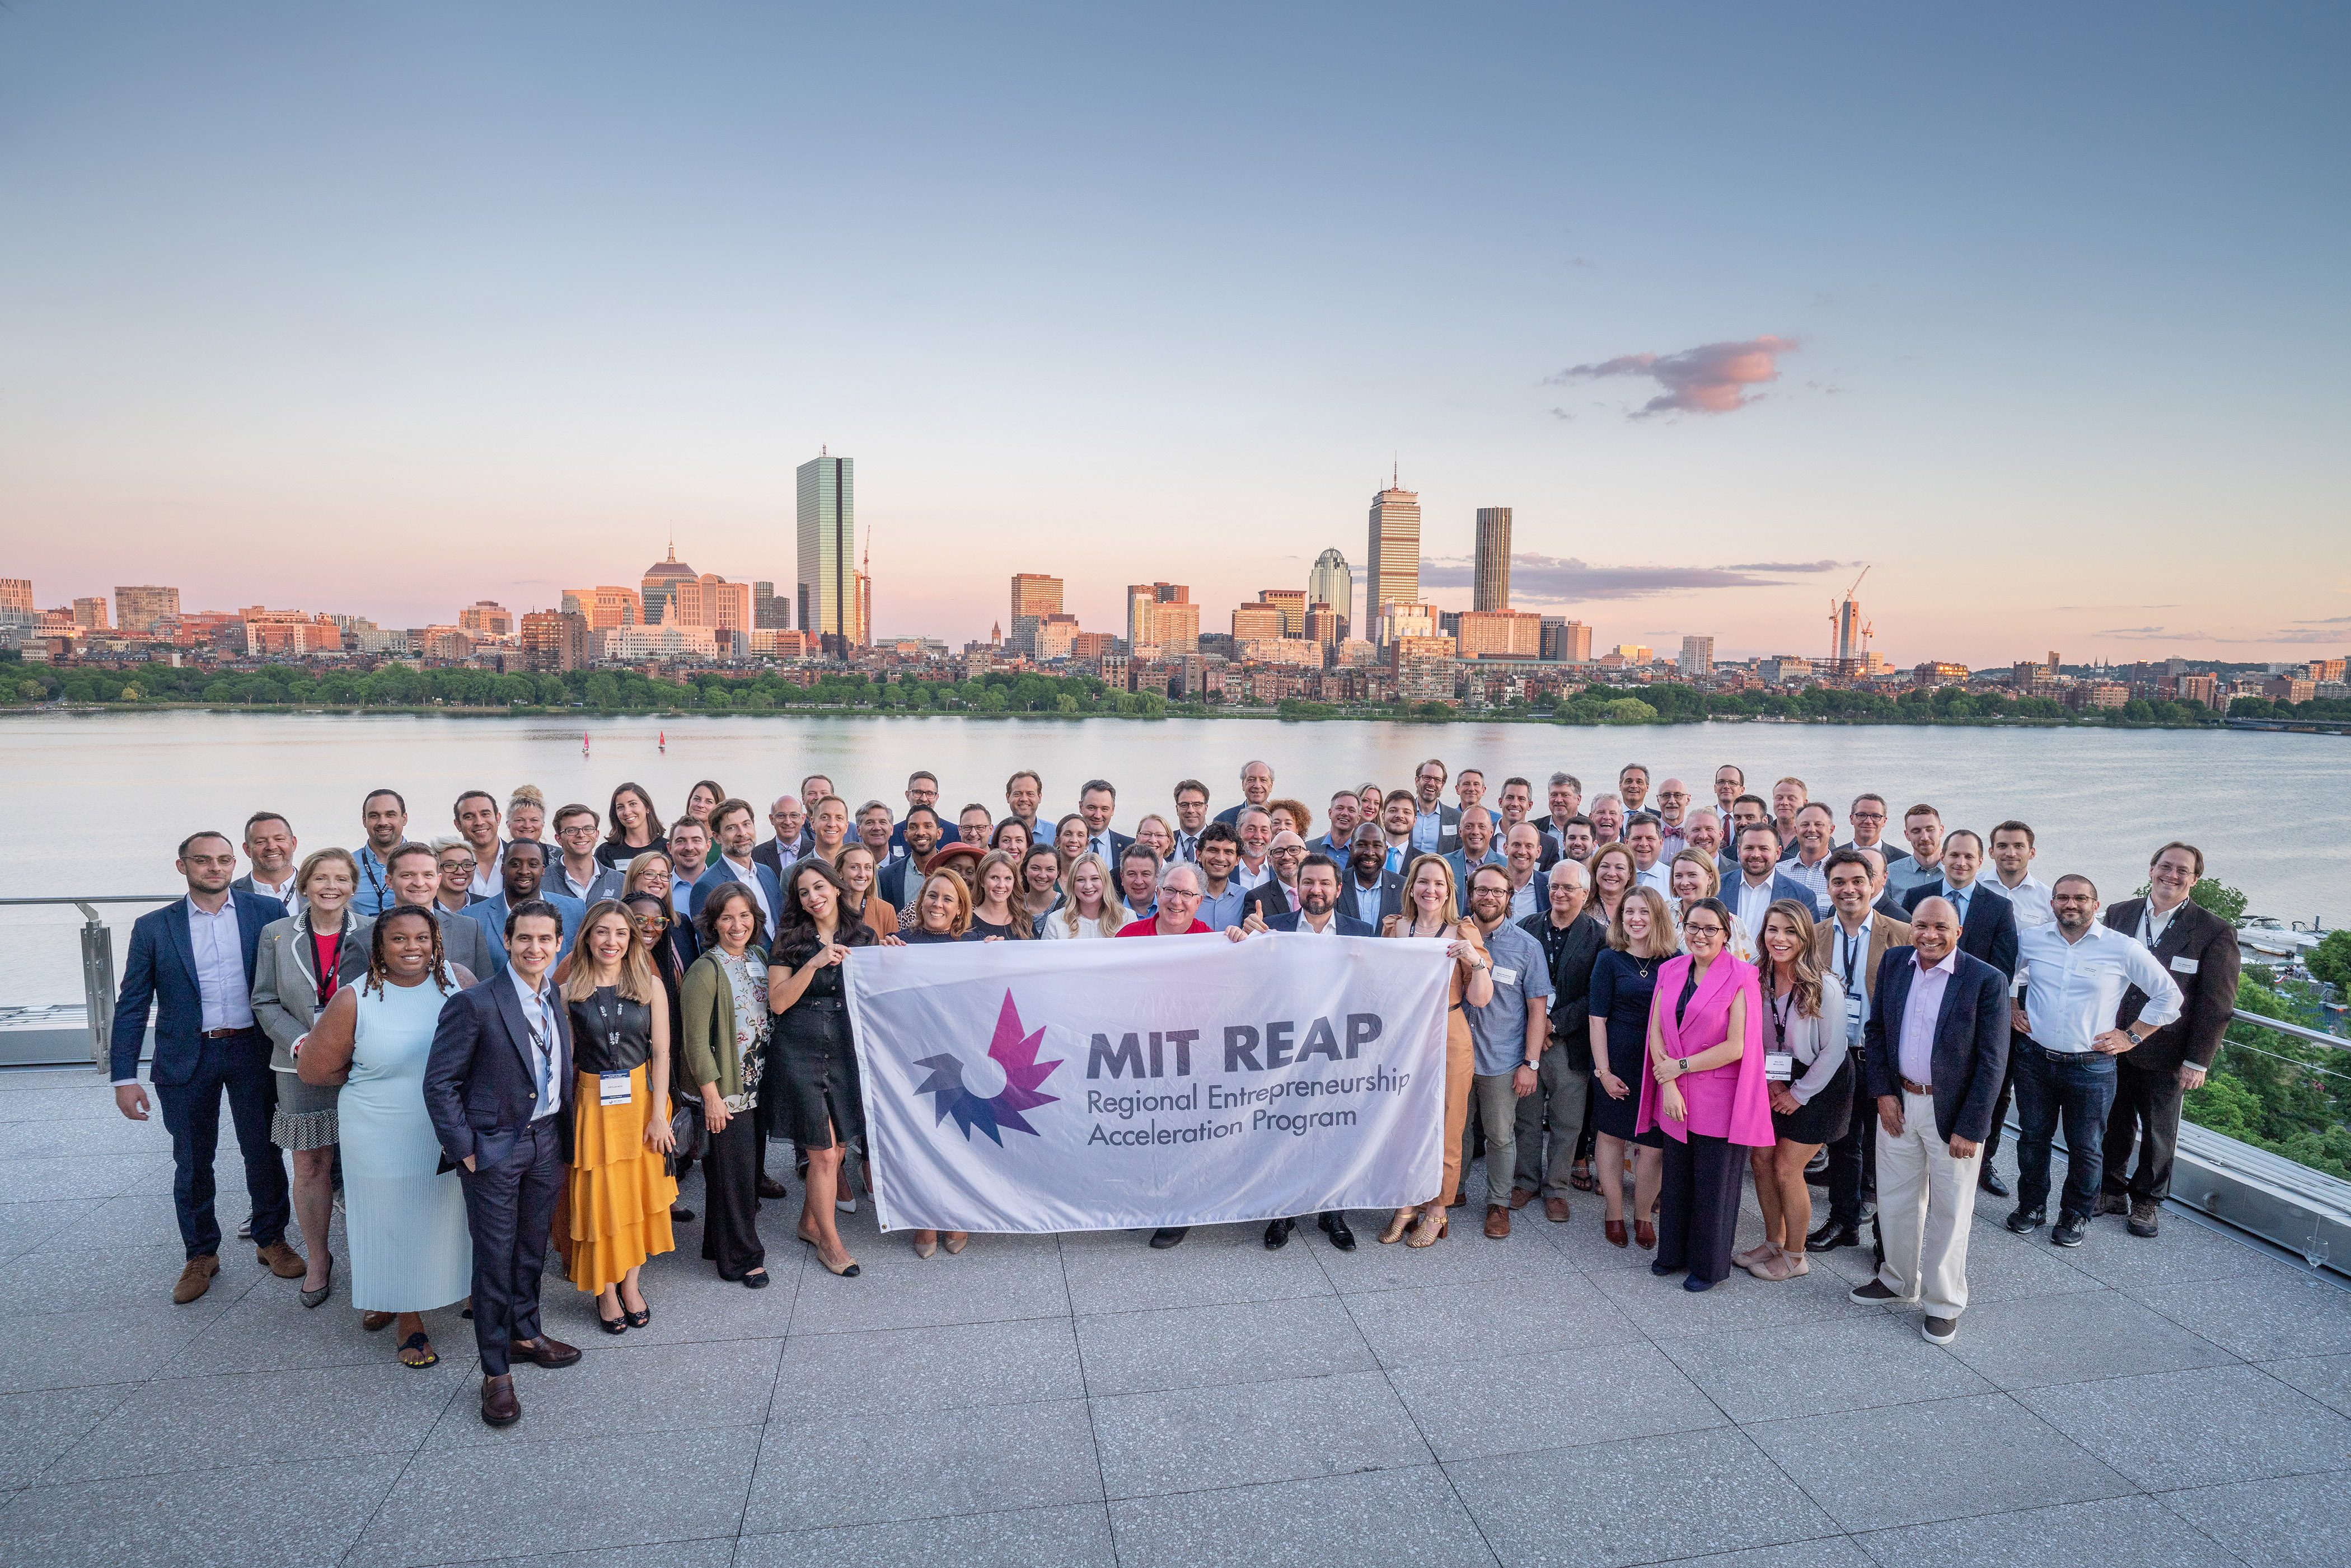 Hungary Picked to Participate in MIT Innovation Program